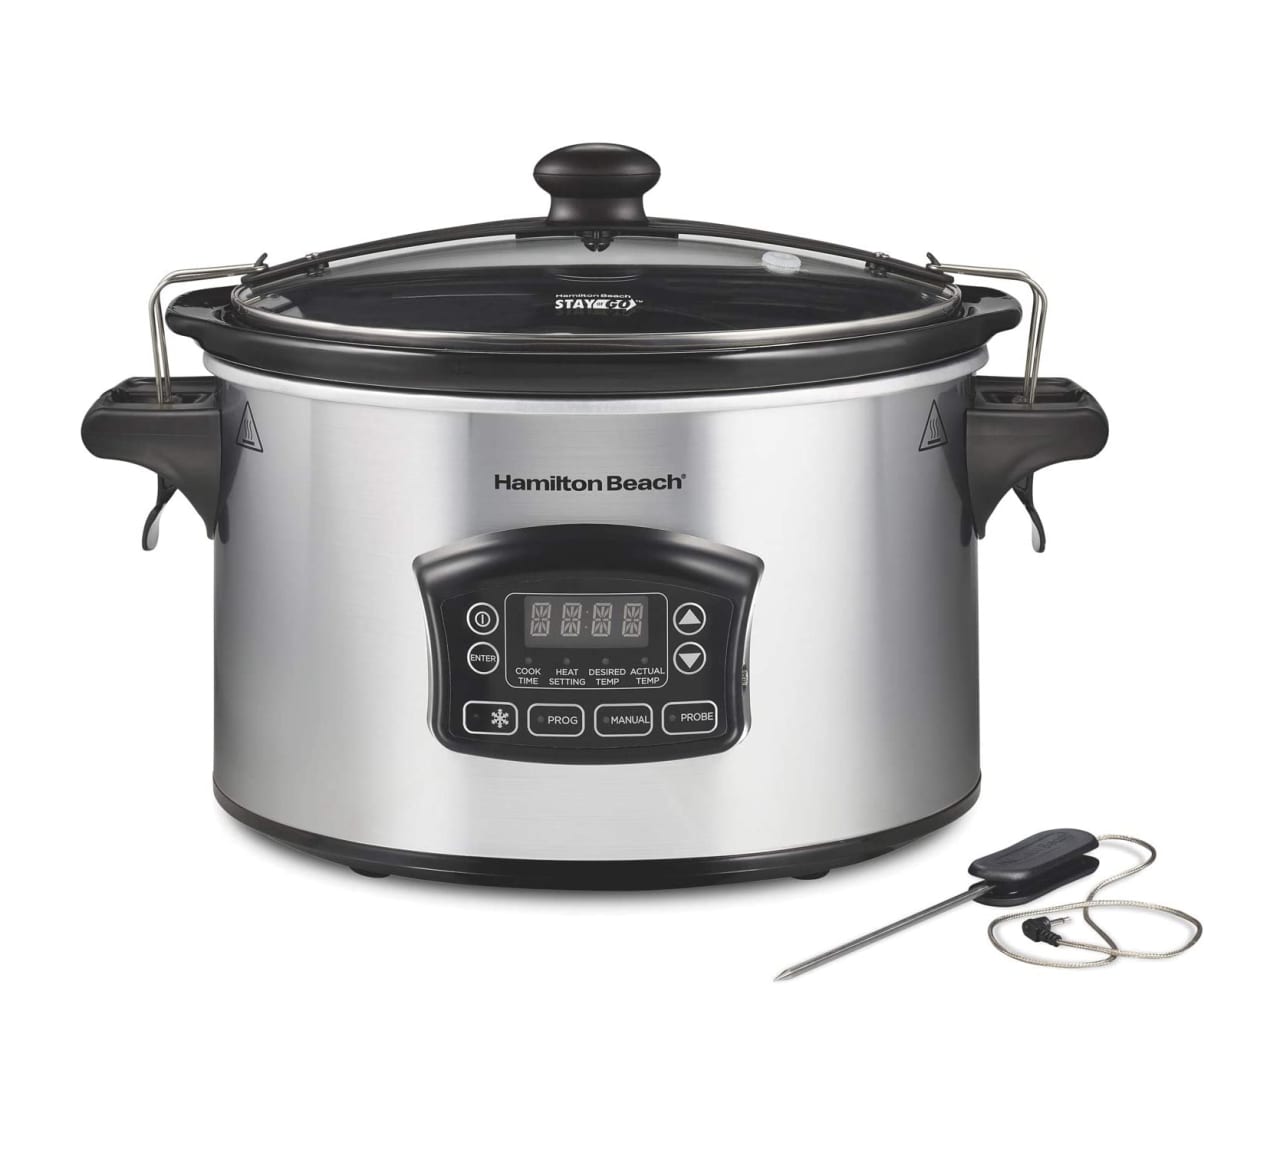 Equipment Review: Best Slow Cookers (Crock Pots) & Our Testing